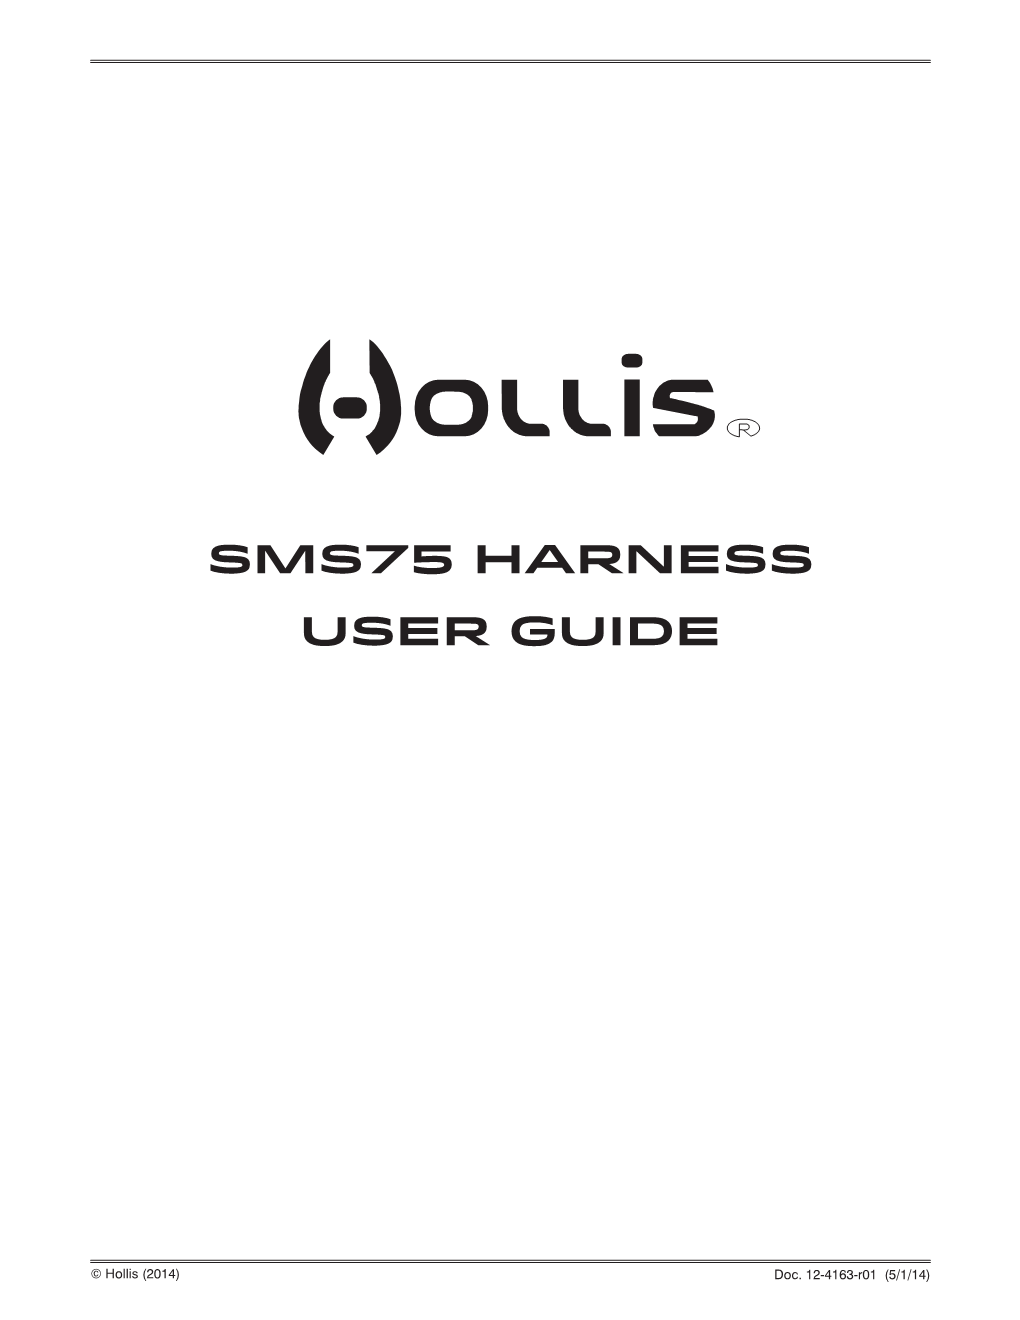 Sms75 Harness User Guide